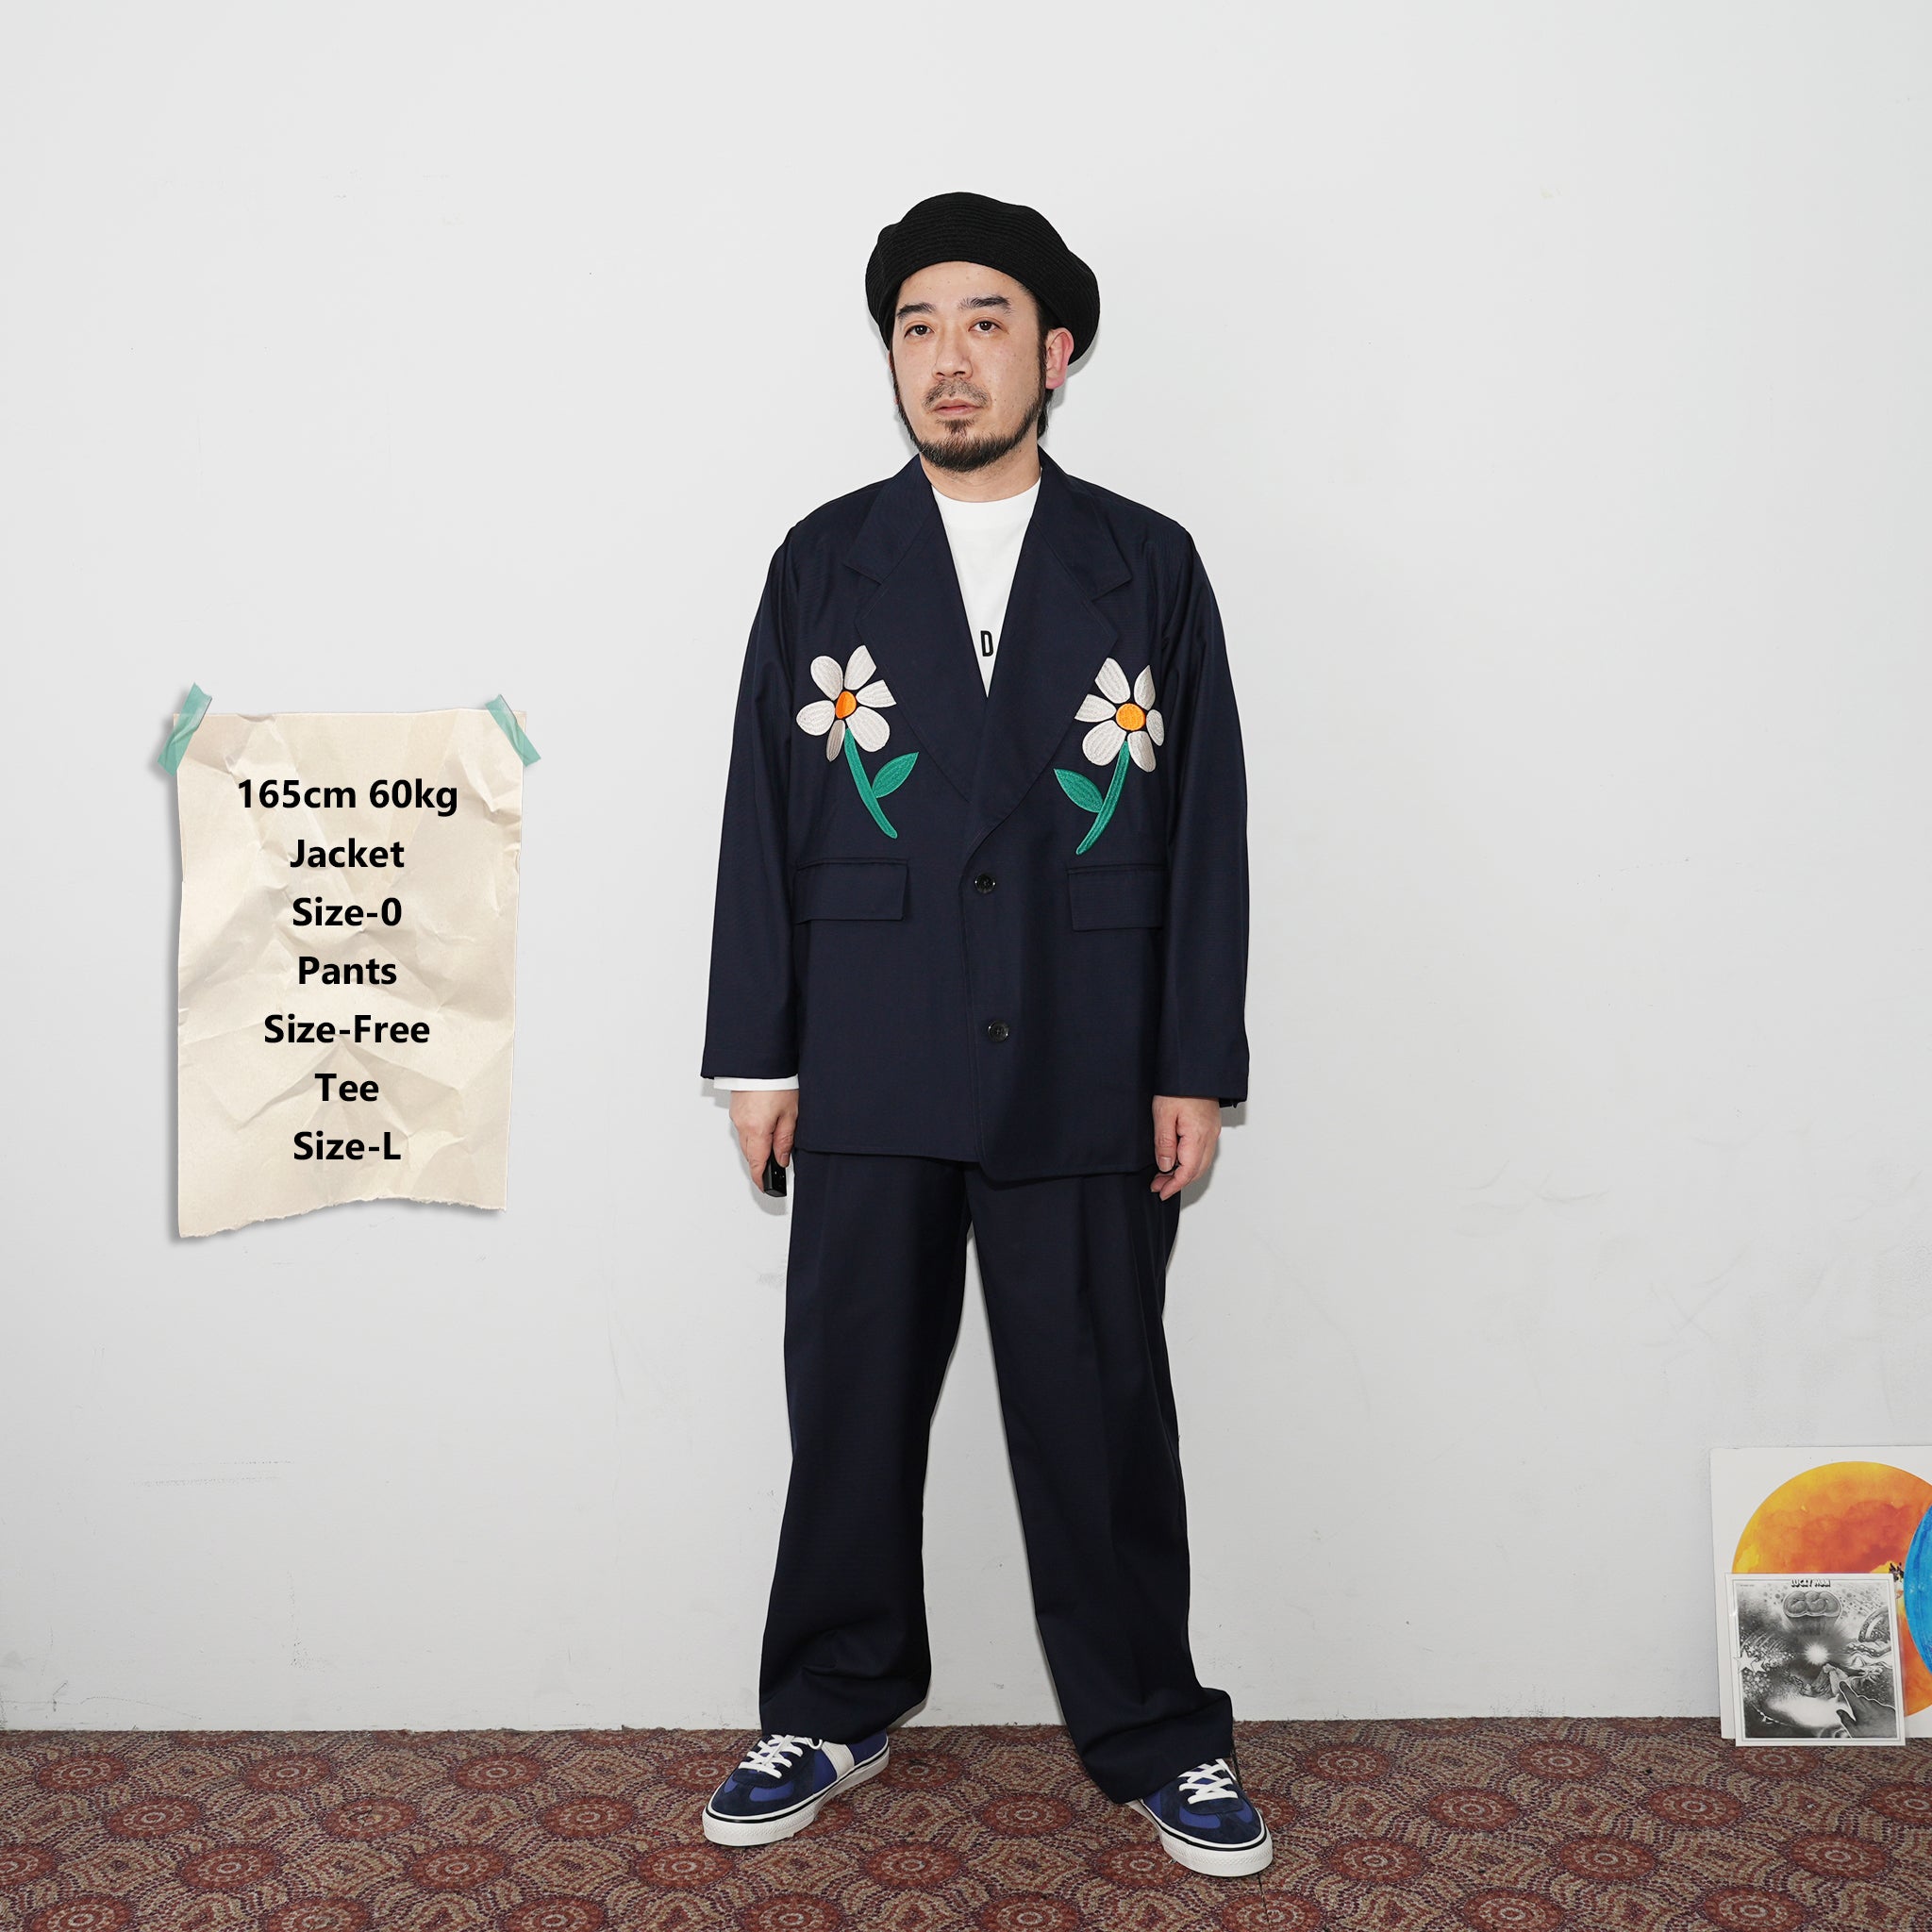 No:LL-JK01 | Name:Flower Embroidery Big Jacket | Color:Gray/Navy